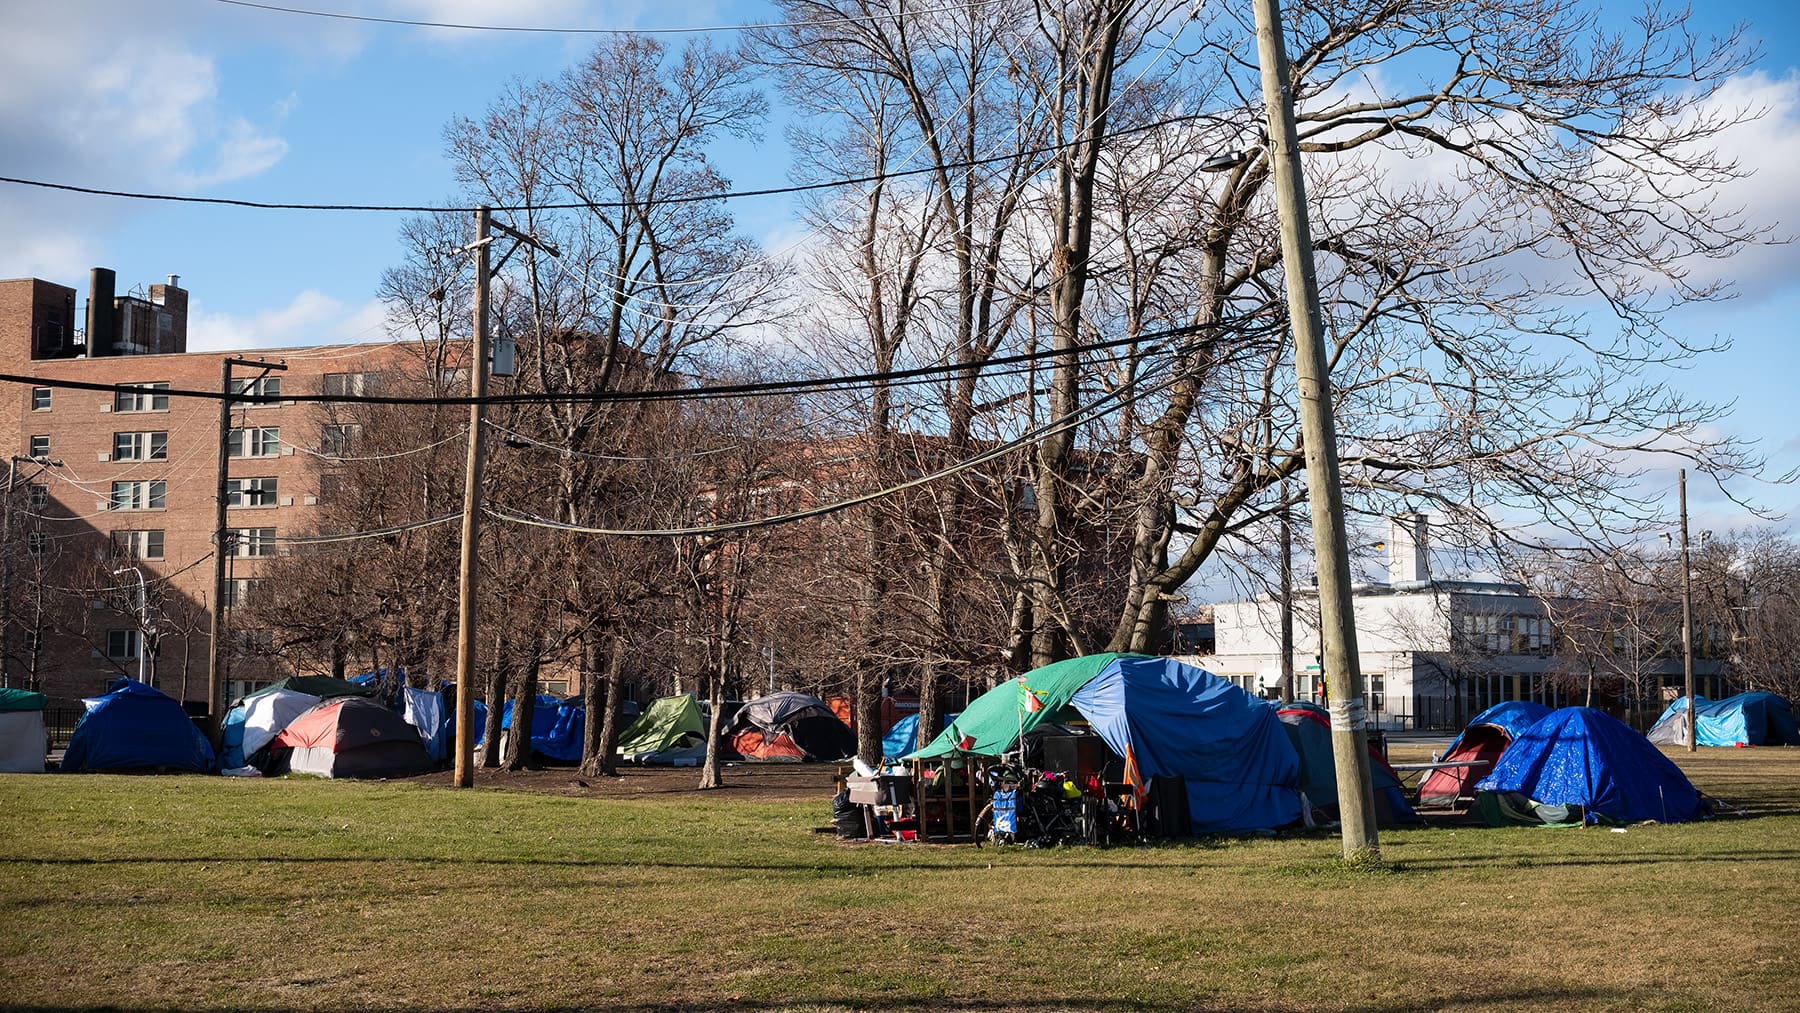 Encampment in open lot adjacent to the 12th District Chicago Police Department.